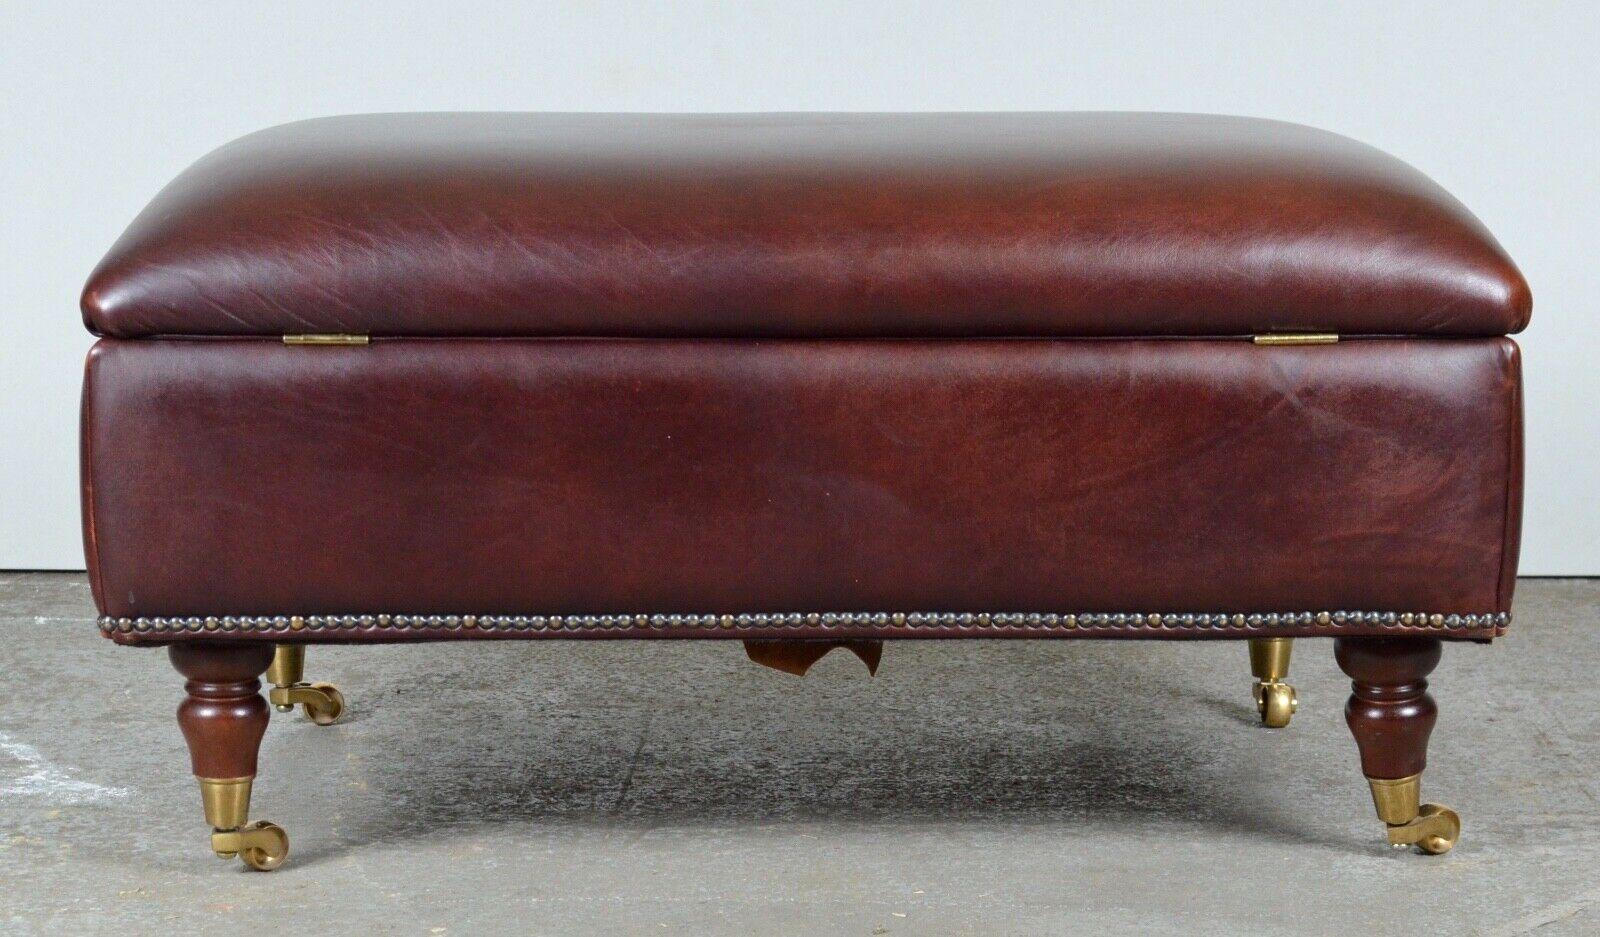 Hand-Crafted Large Laura Ashley Elliot Heritage Brown Leather Footstool Internal Storage